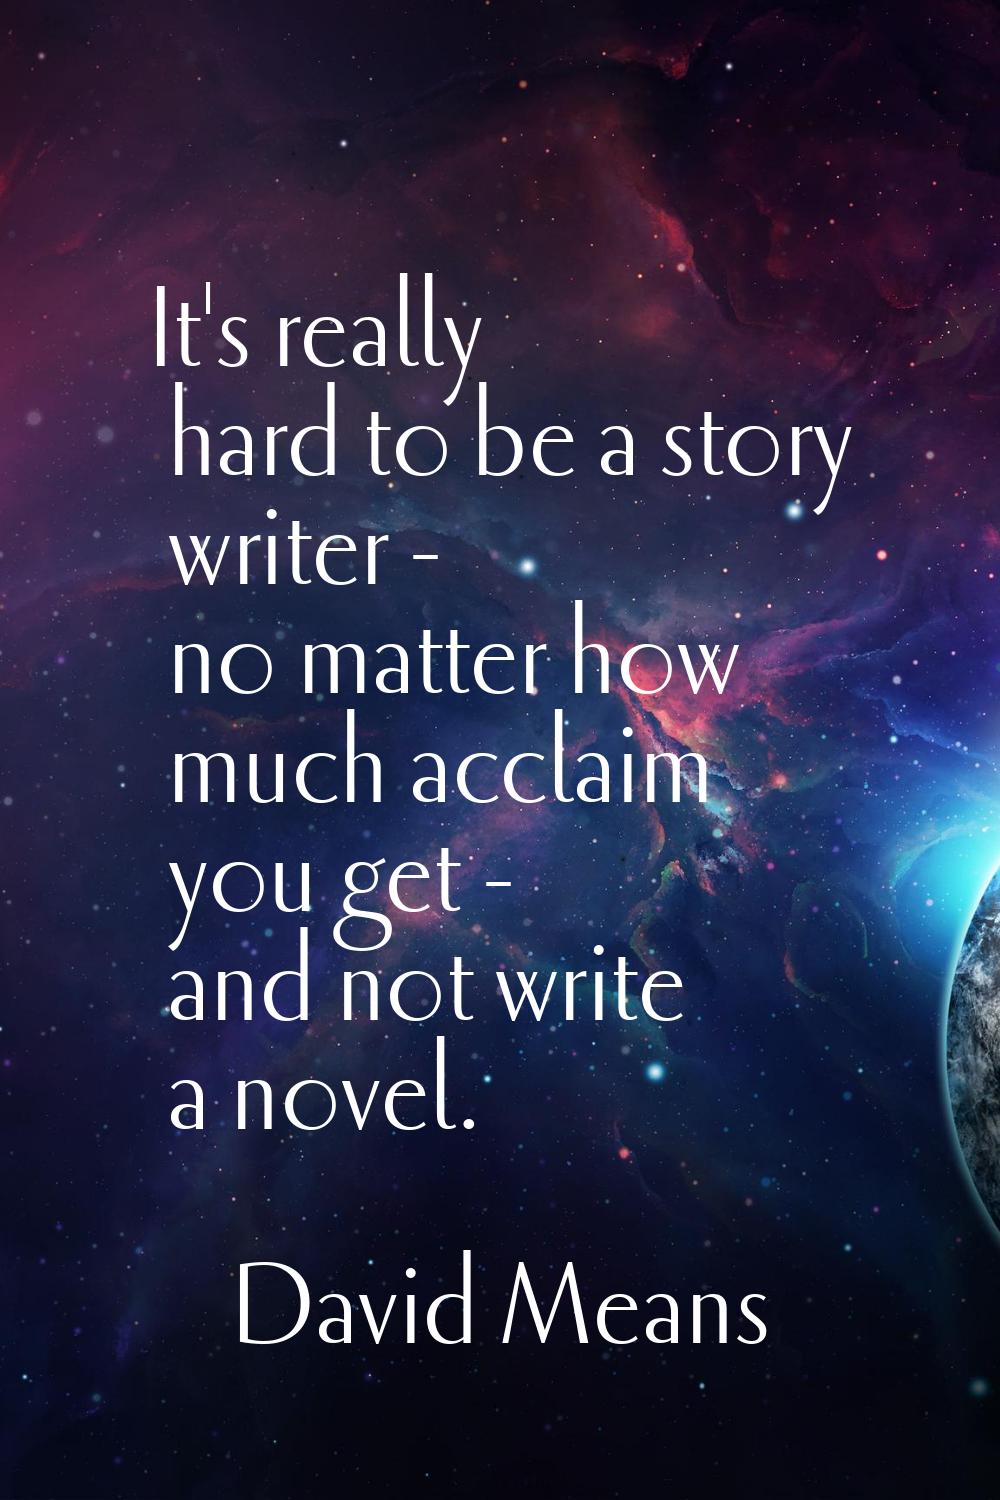 It's really hard to be a story writer - no matter how much acclaim you get - and not write a novel.